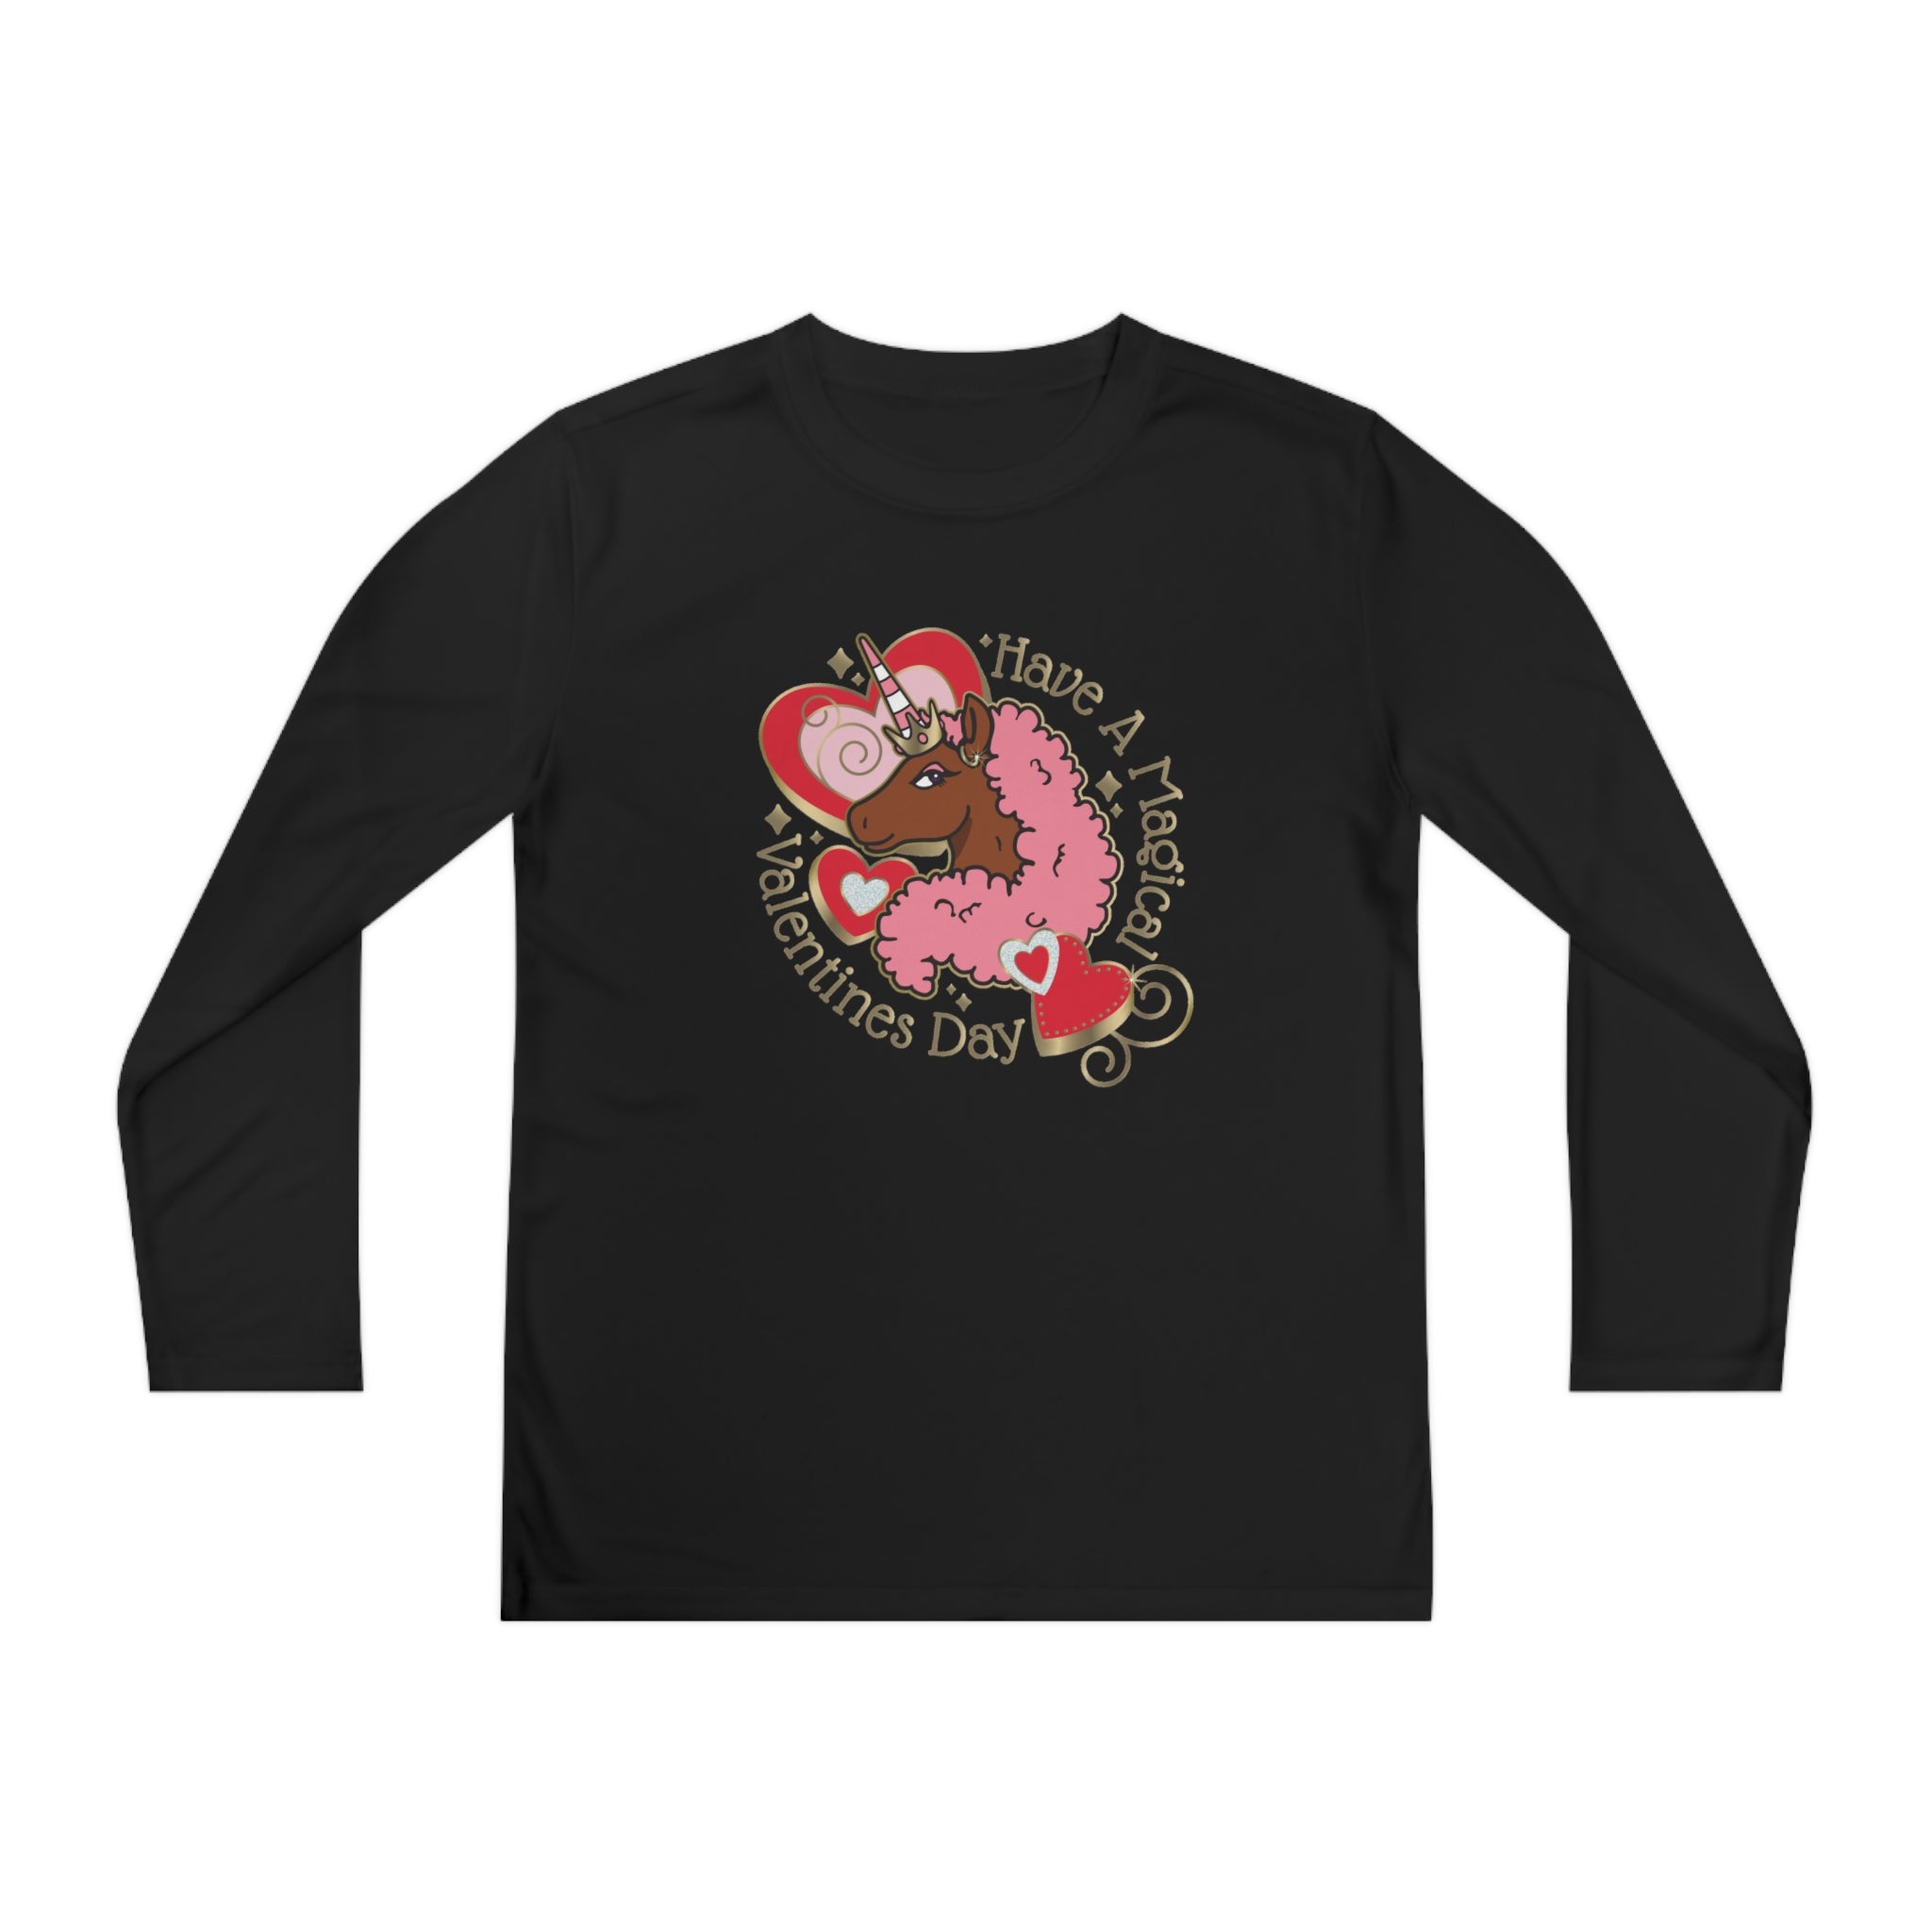 Afro Unicorn "Magical Valentine Day" Youth Long Tee